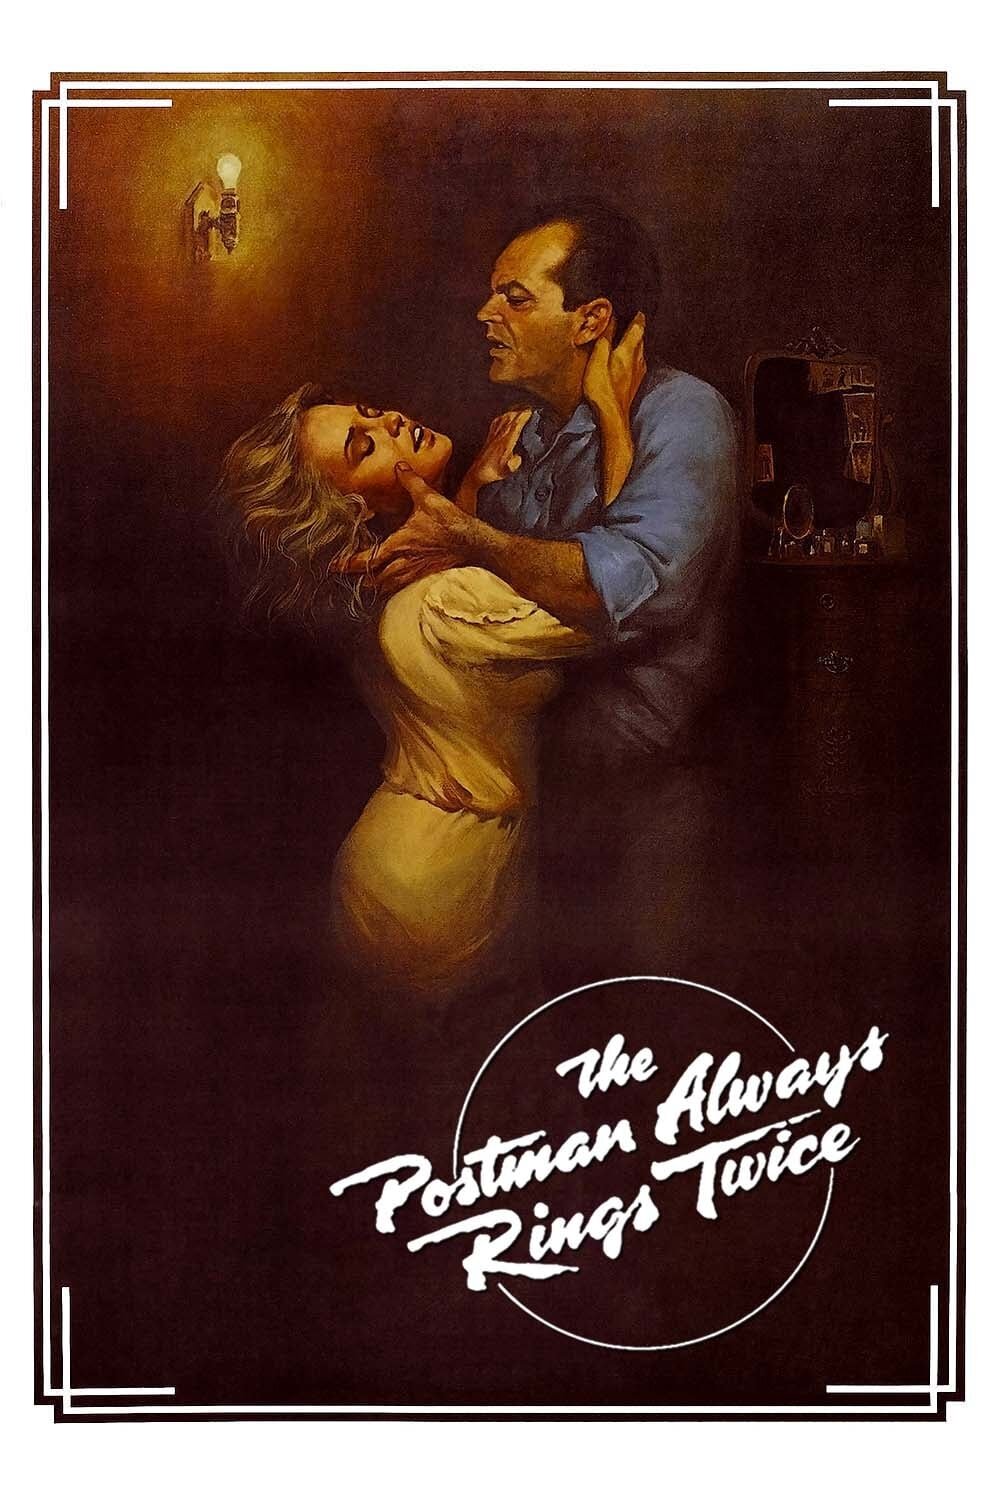 The Postman Always Rings Twice (1981) - Movie - Where To Watch